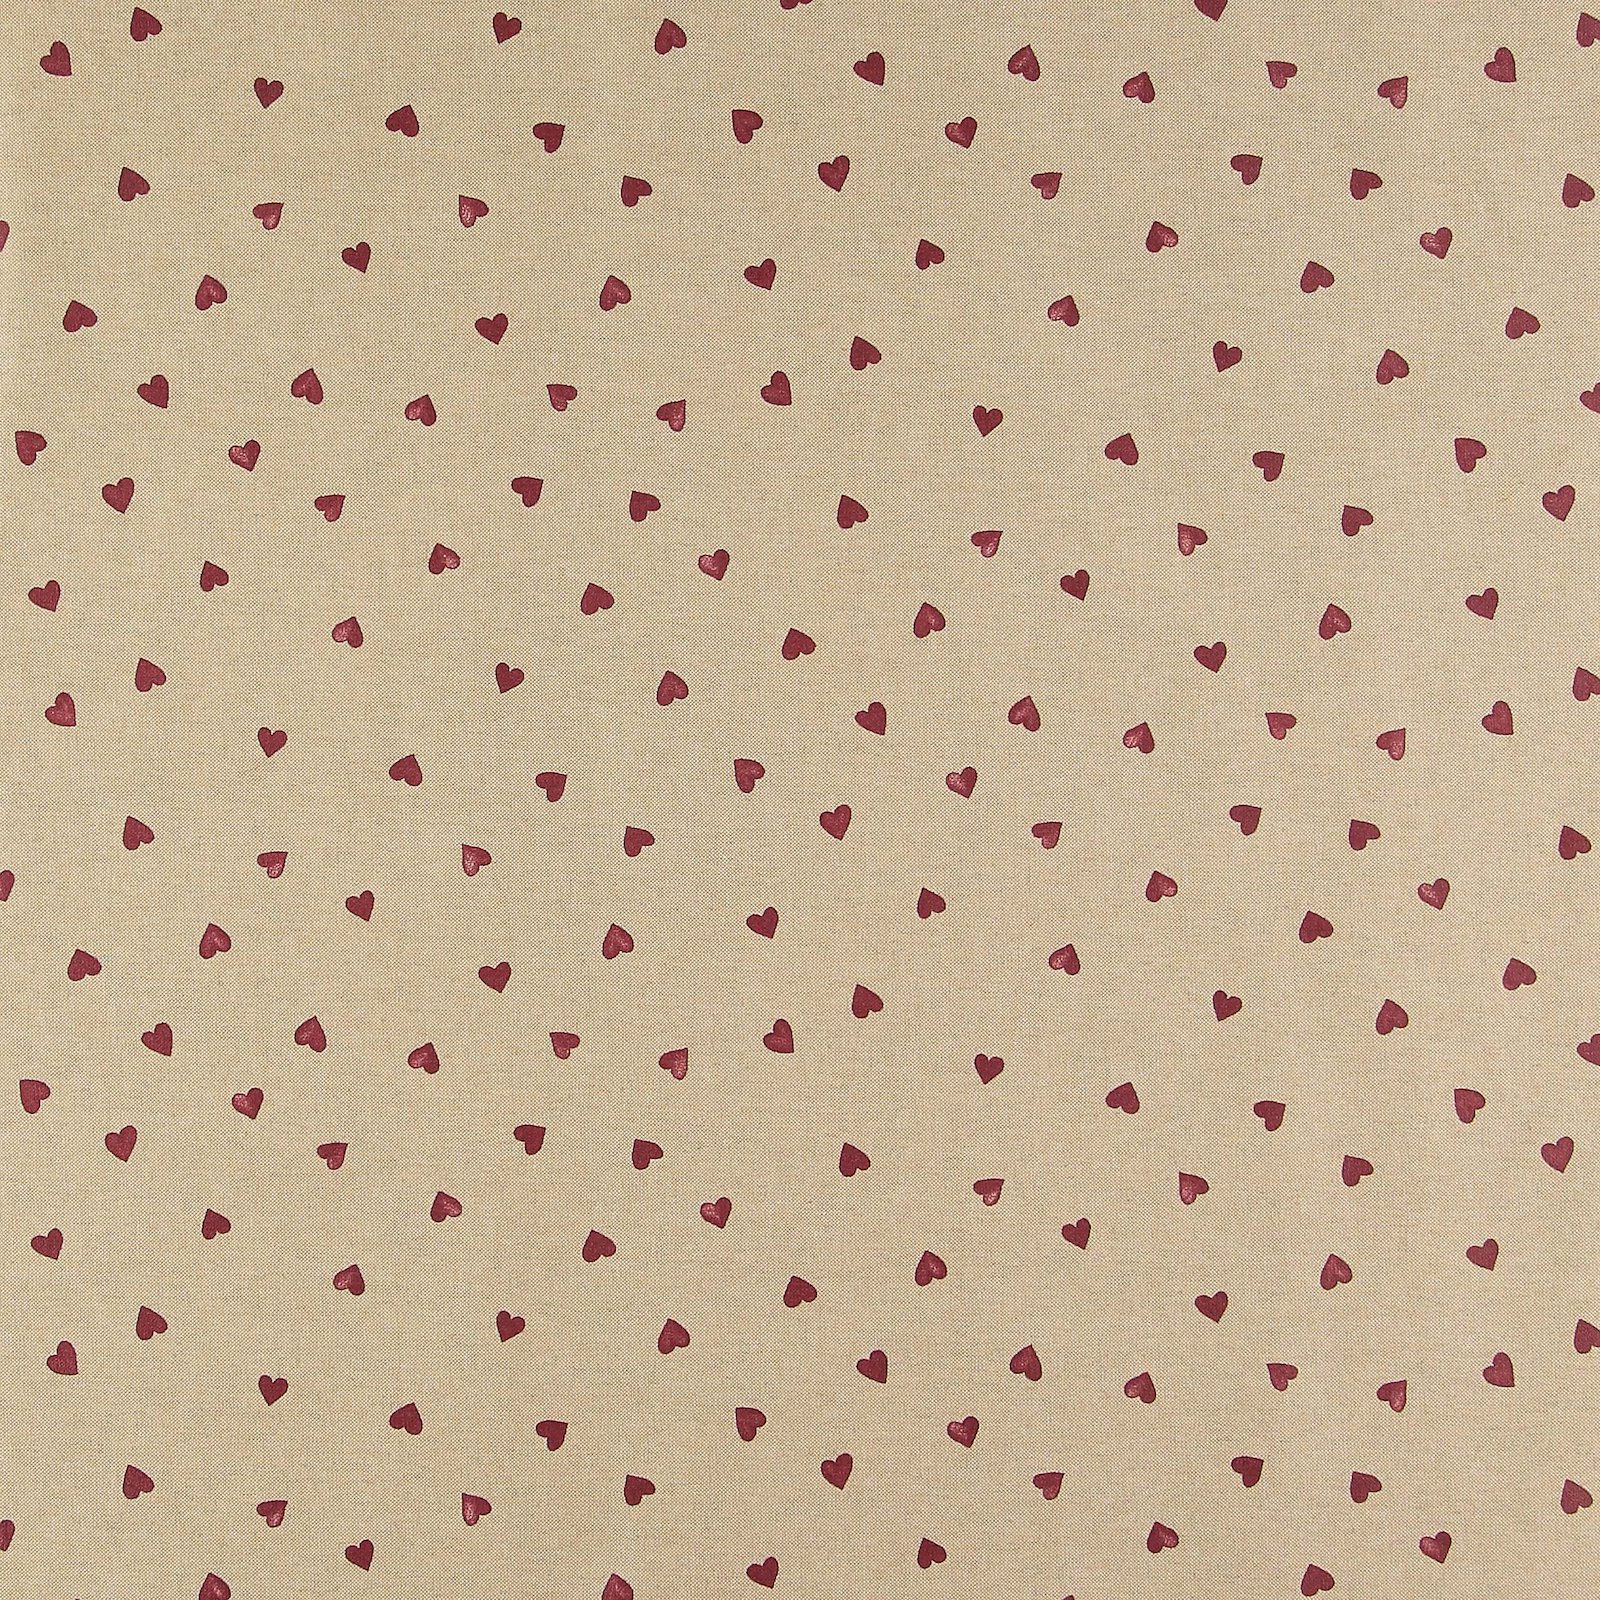 Woven oilcloth linenlook with red hearts 872310_pack_sp